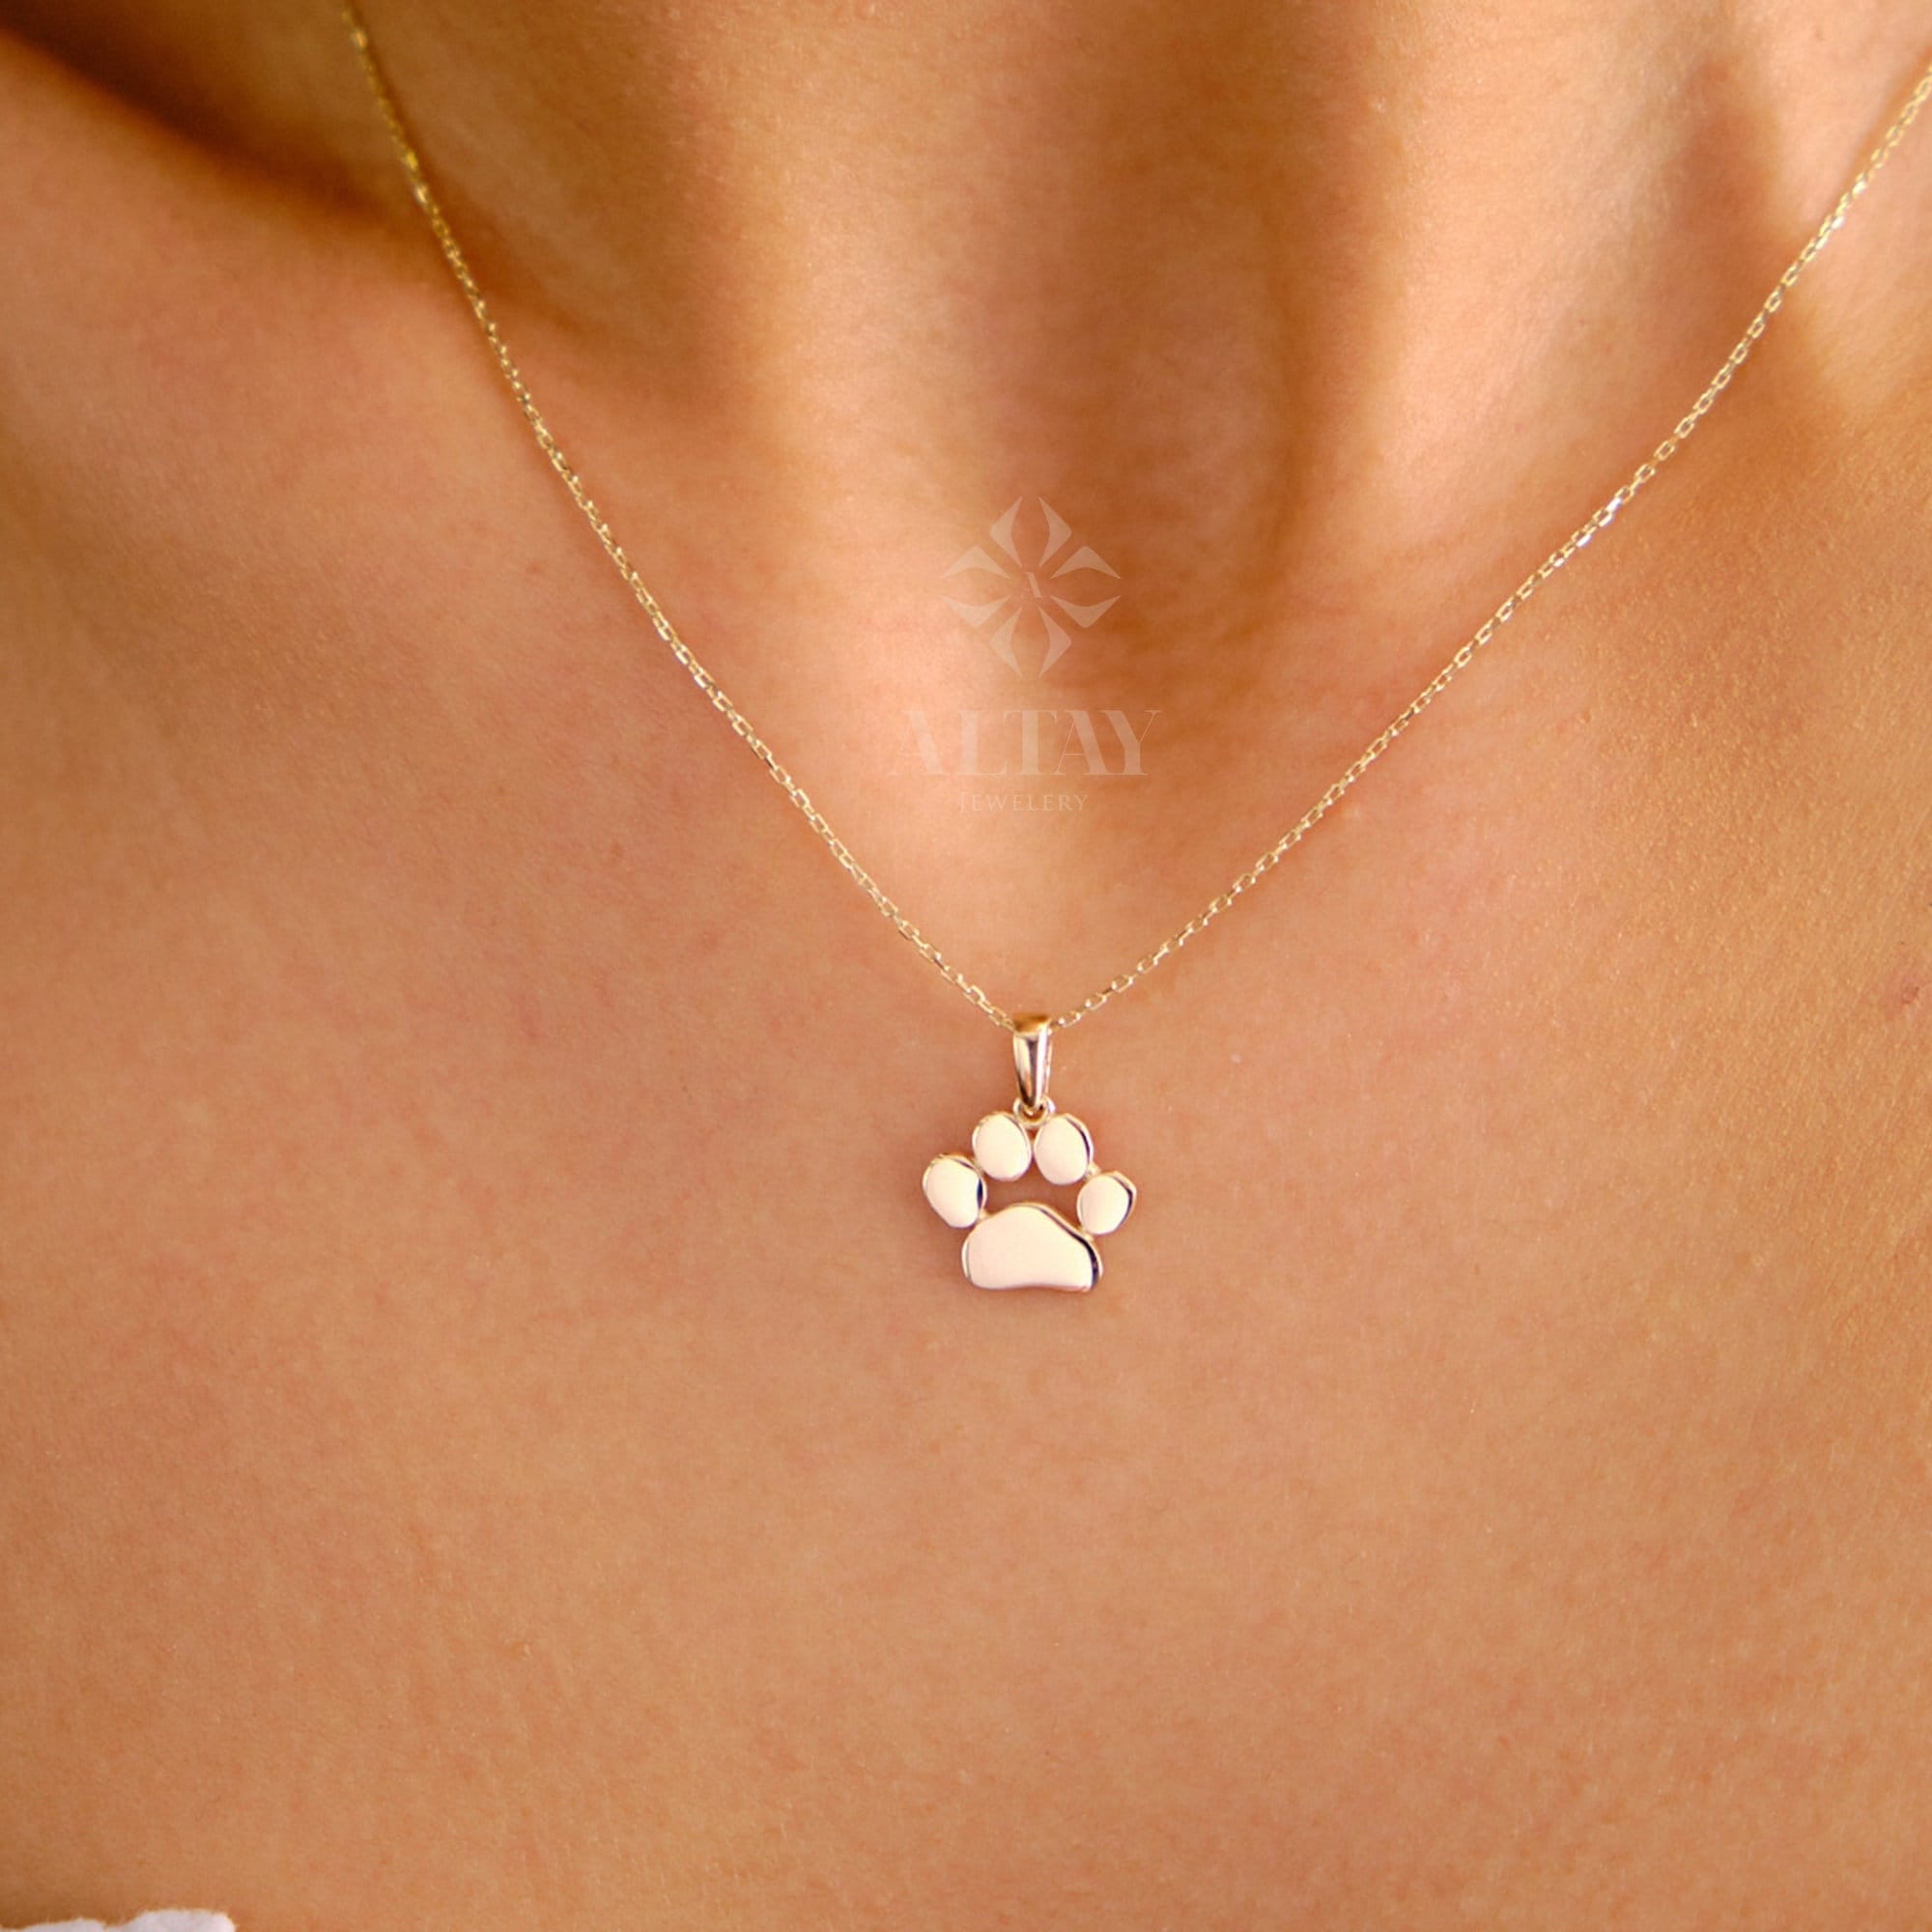 14K Gold Paw Print Name Necklace, Personalized Dog Paw Necklace, Tiny Dog Cat Lover Charm Pendant, Animal Necklace, Pet Memorial Necklace